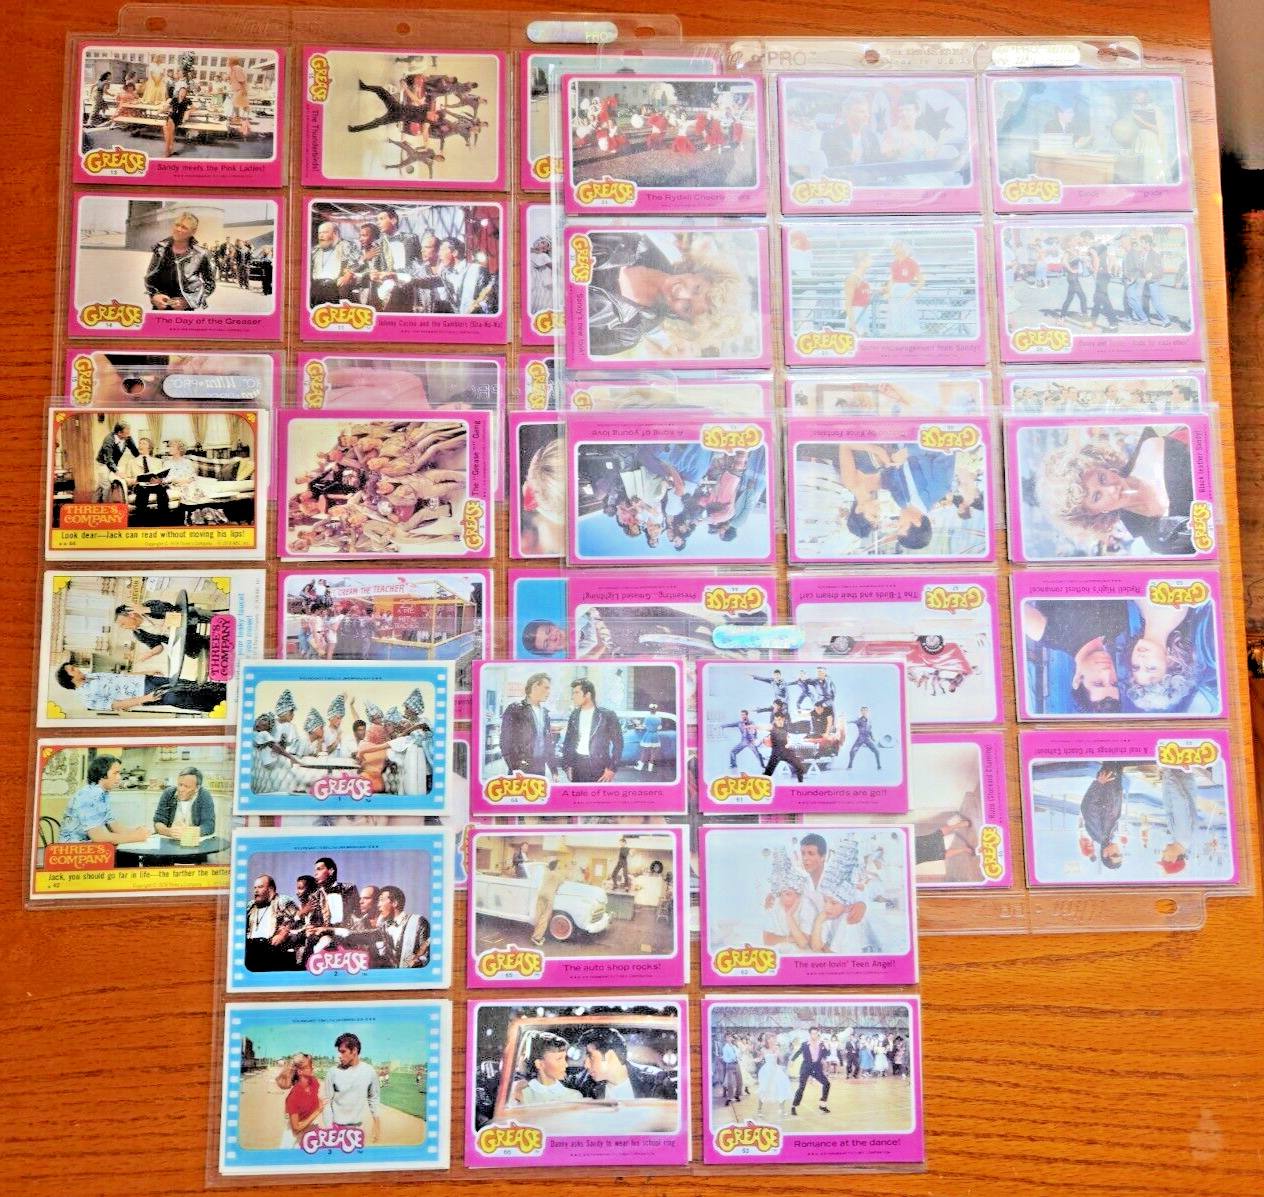 1978 Topps Grease Movie Series 1 Trading Cards Complete Set 1-66 + 1-11 Stickers